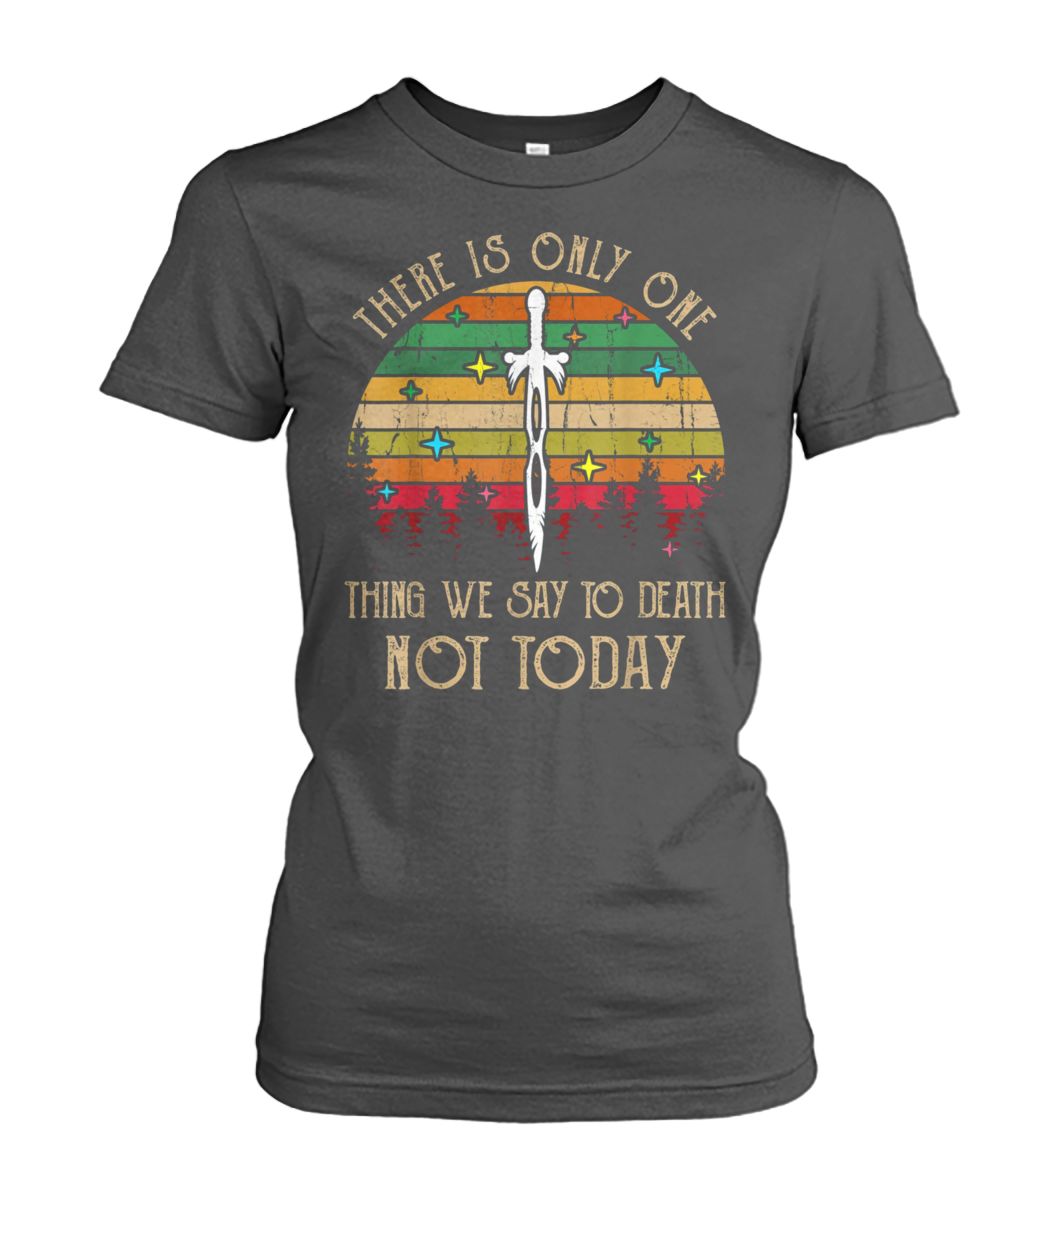 Game of thrones there is only one thing we say to death not today women's crew tee